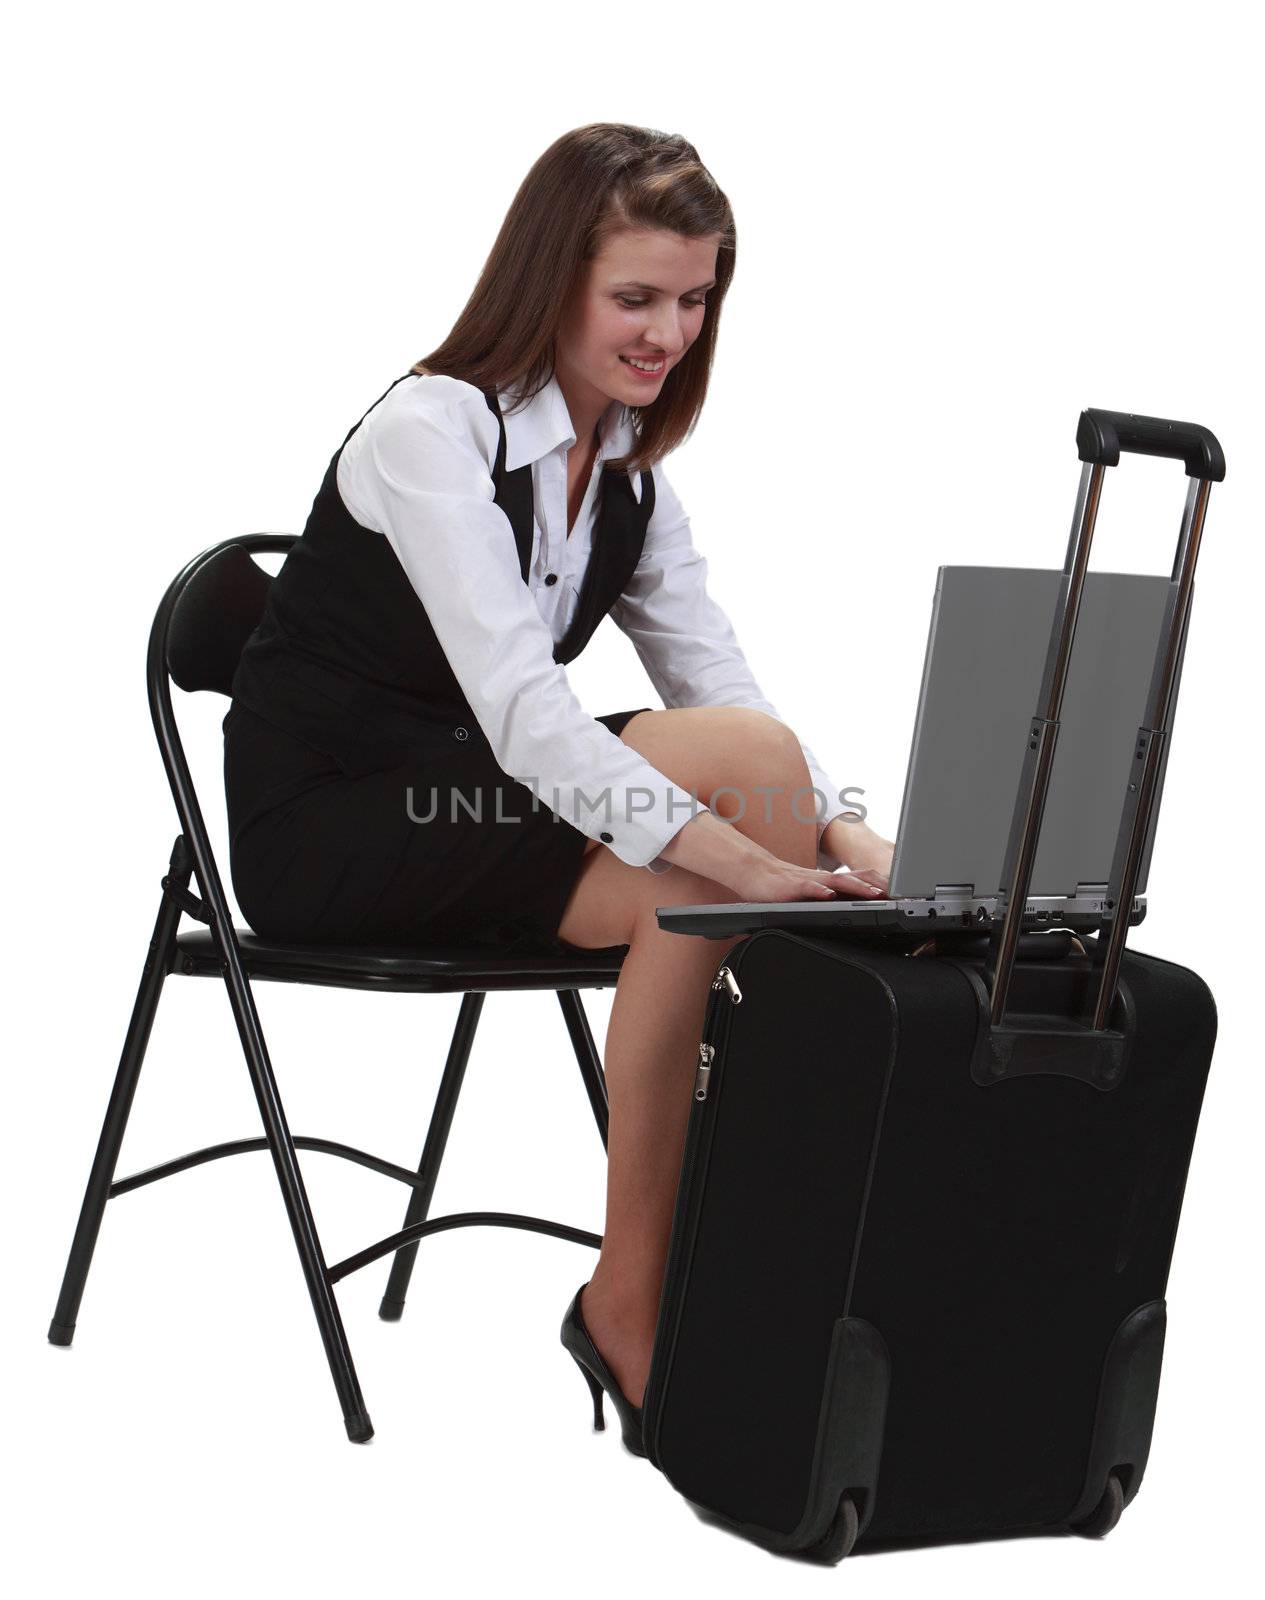 Young woman traveler working in a hurry on her latop on a suitcase- isolated against a white background.